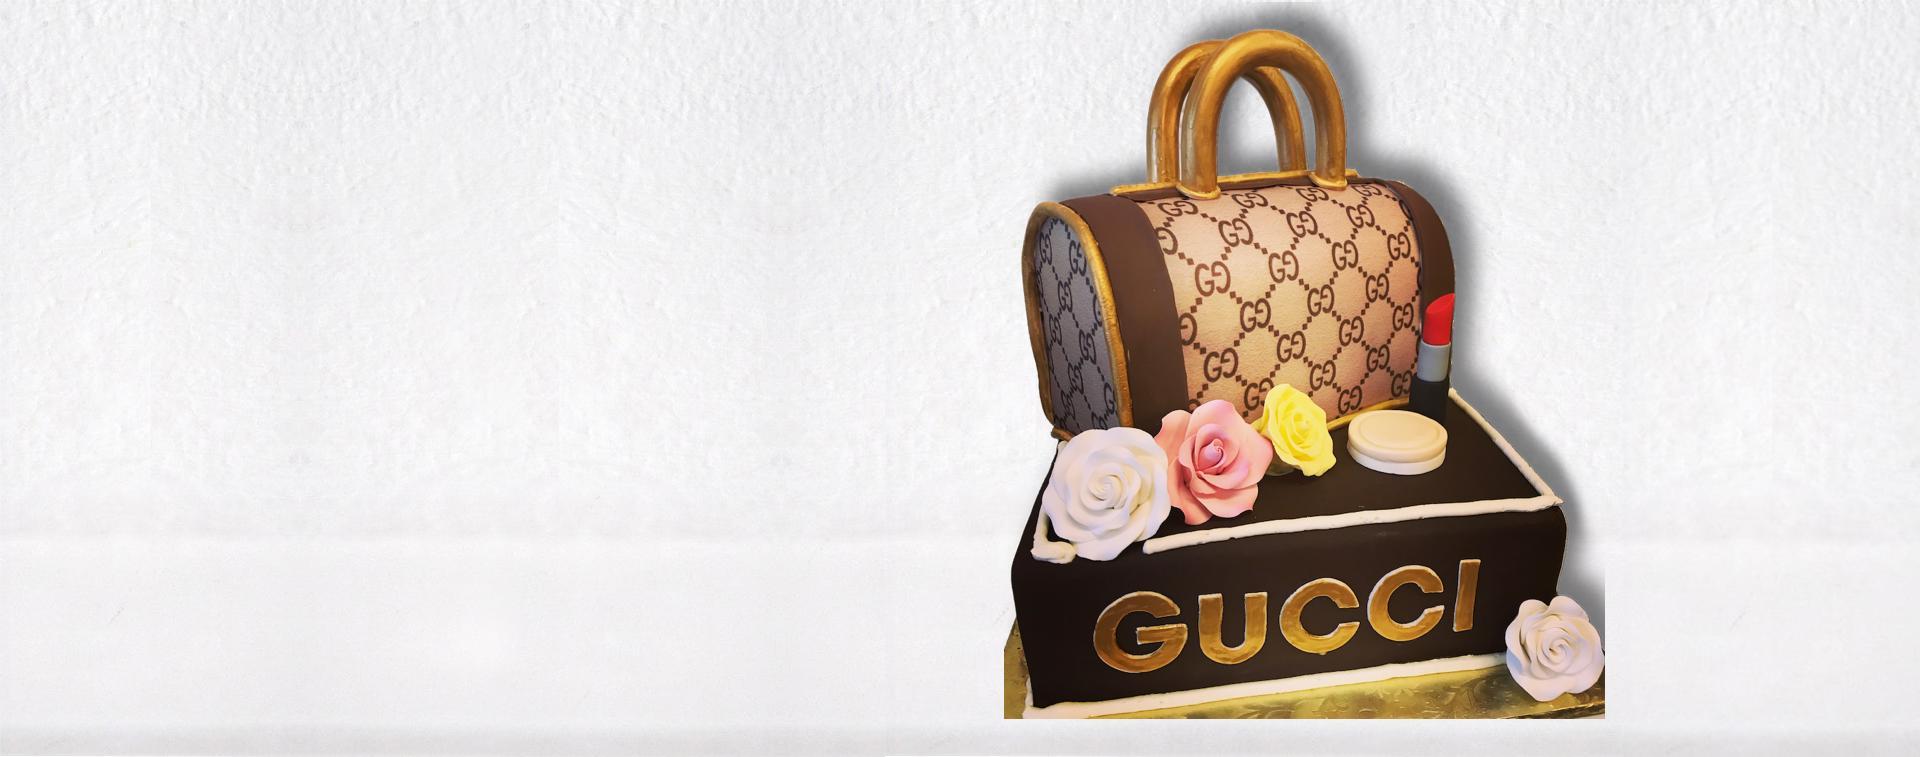 Louis vuitton gucci cake with gold drip